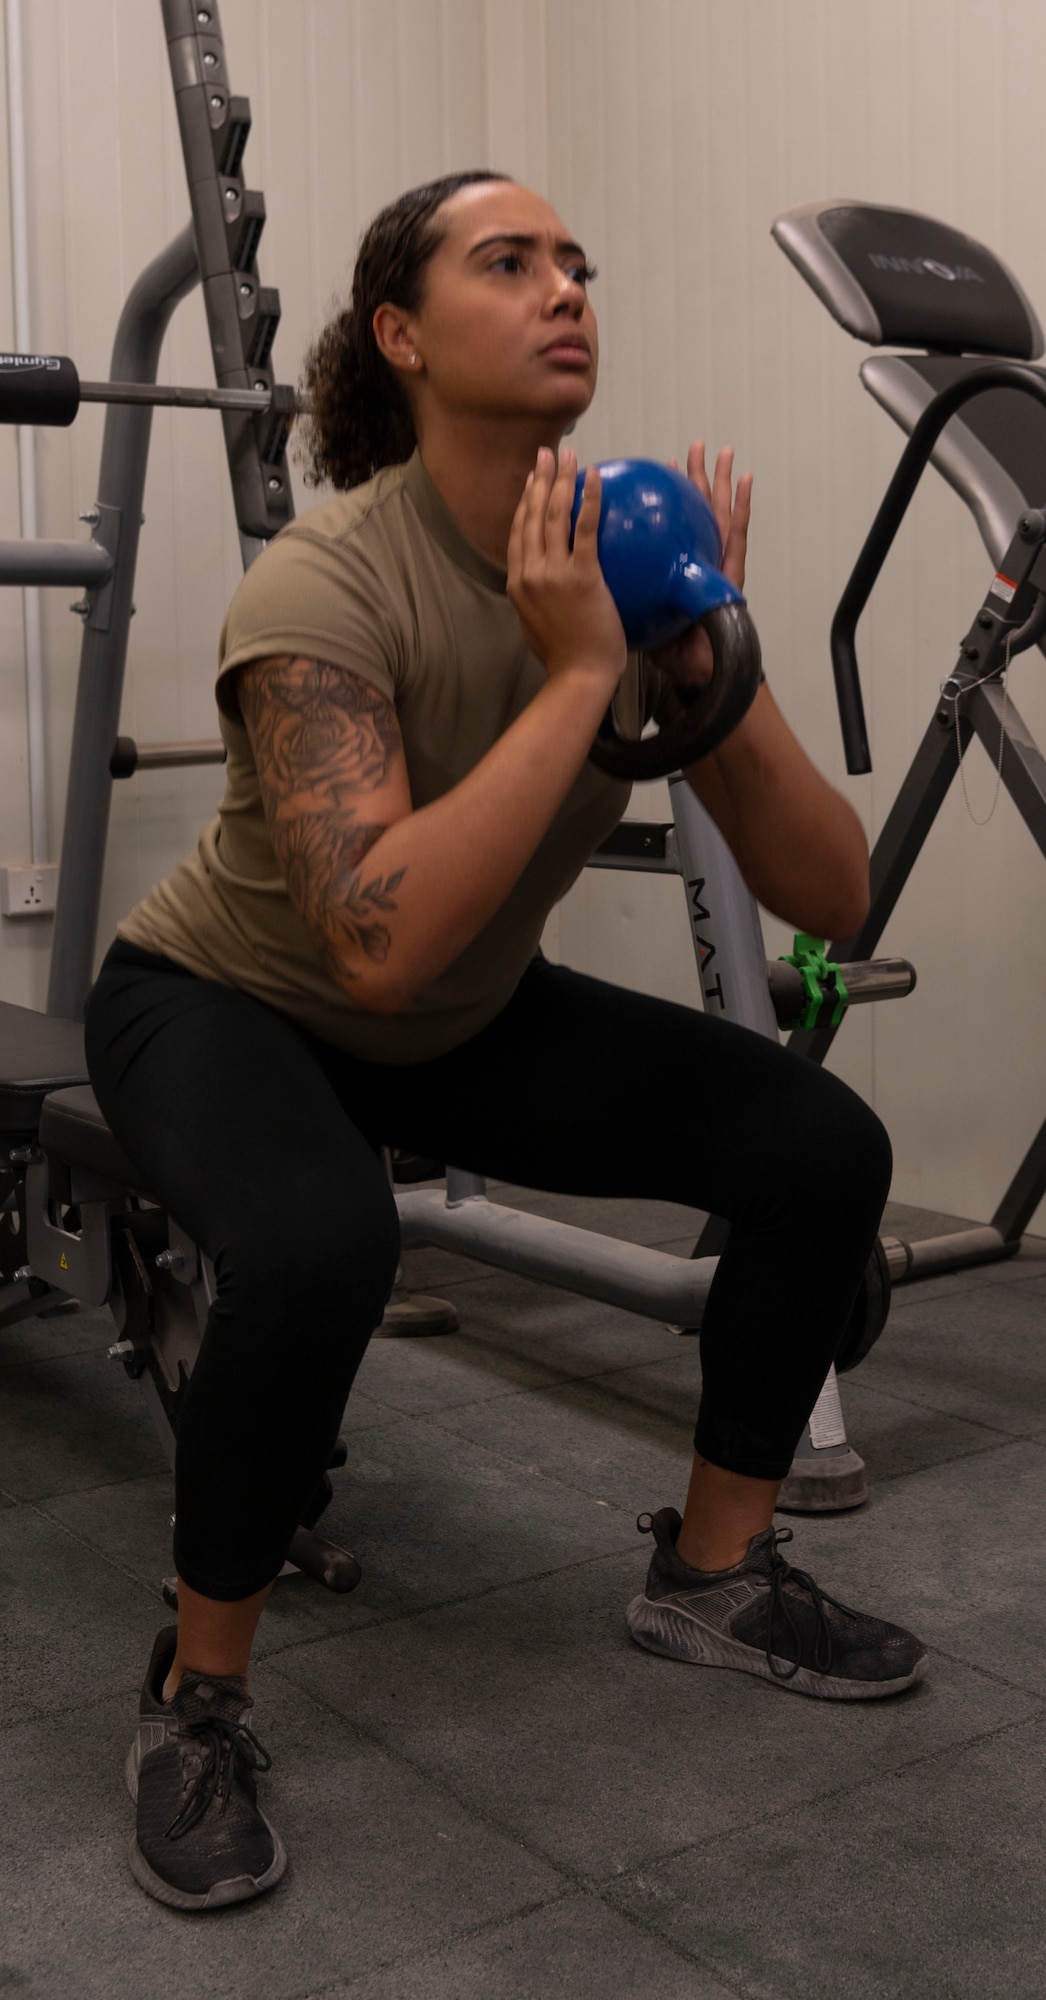 Senior Airman Tyra Hazelhoff Mitchell, 332d Expeditionary Medical Squadron, Physical Therapist Technician, explains rehabilitation and exercise treatment for injured Airmen.